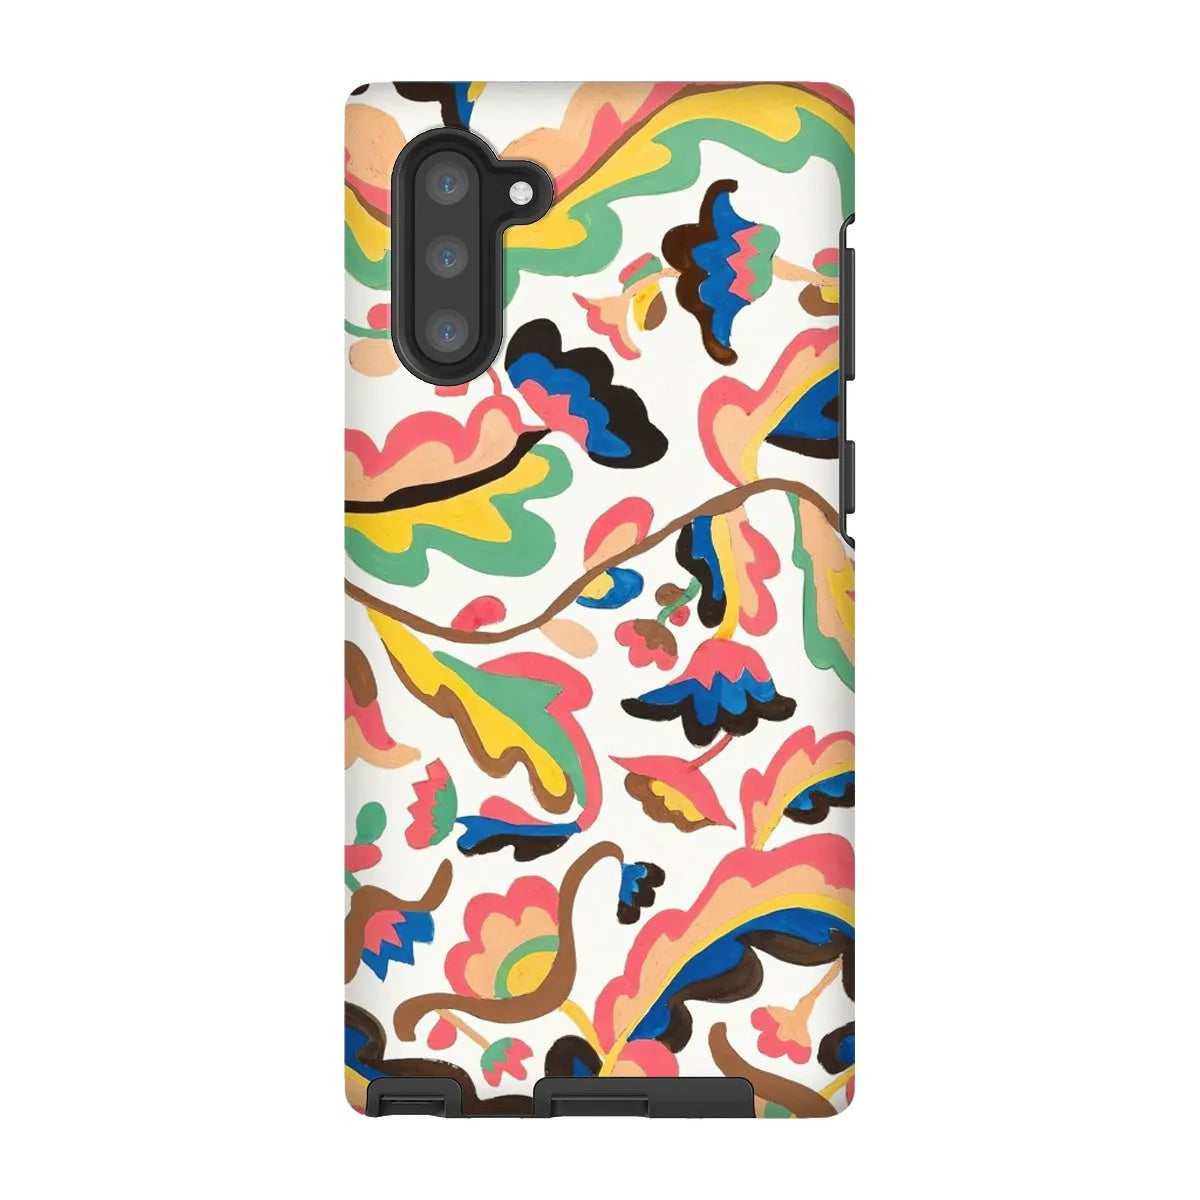 Colcha Floral Aesthetic Pattern Phone Case - Etna Wiswall - Samsung Galaxy Note 10 / Matte - Mobile Phone Cases